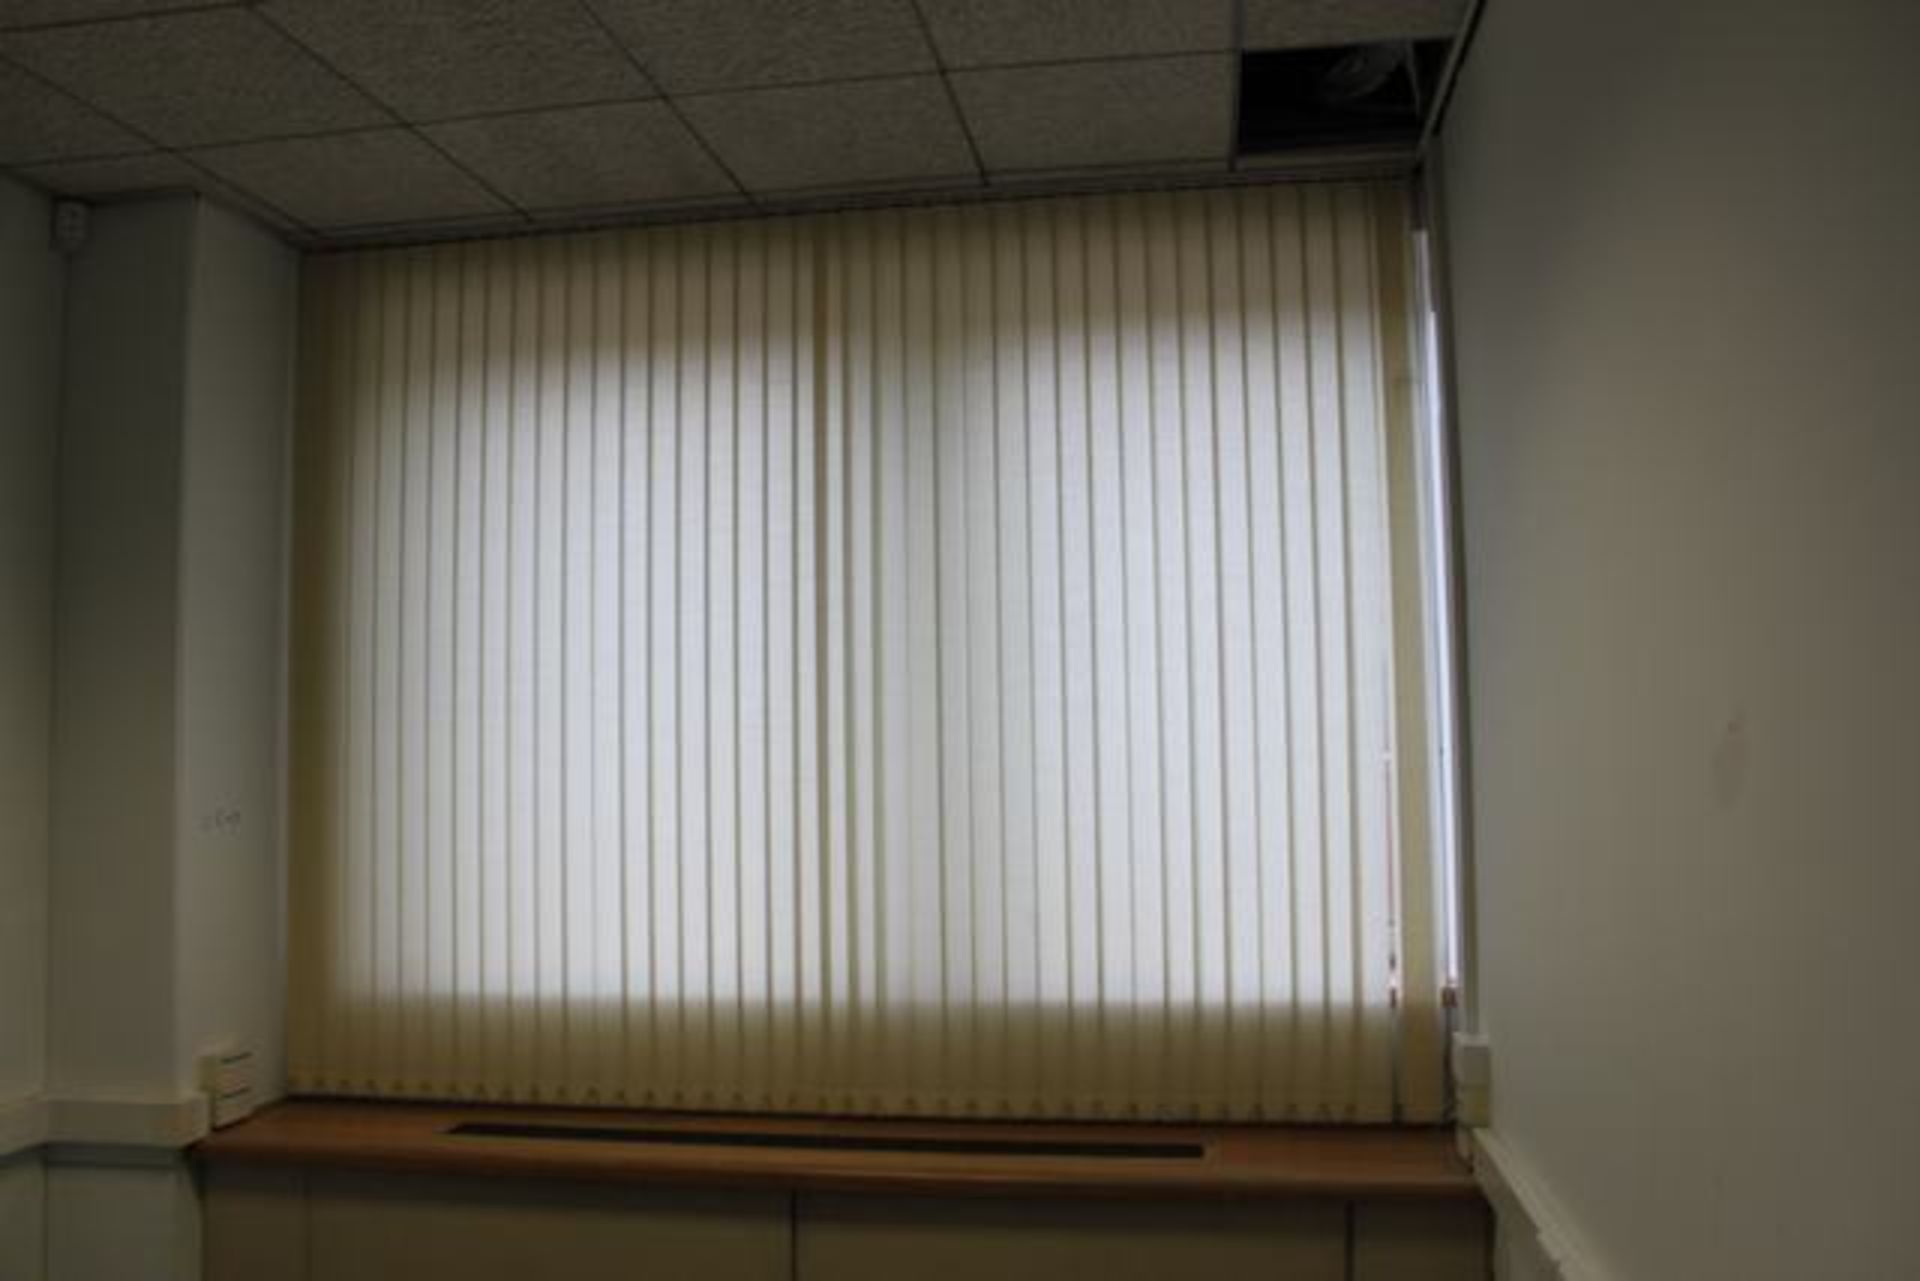 Vertical blind cream 2900mm x 2300mm complete with robust aluminium head rail with beaded tilt chain